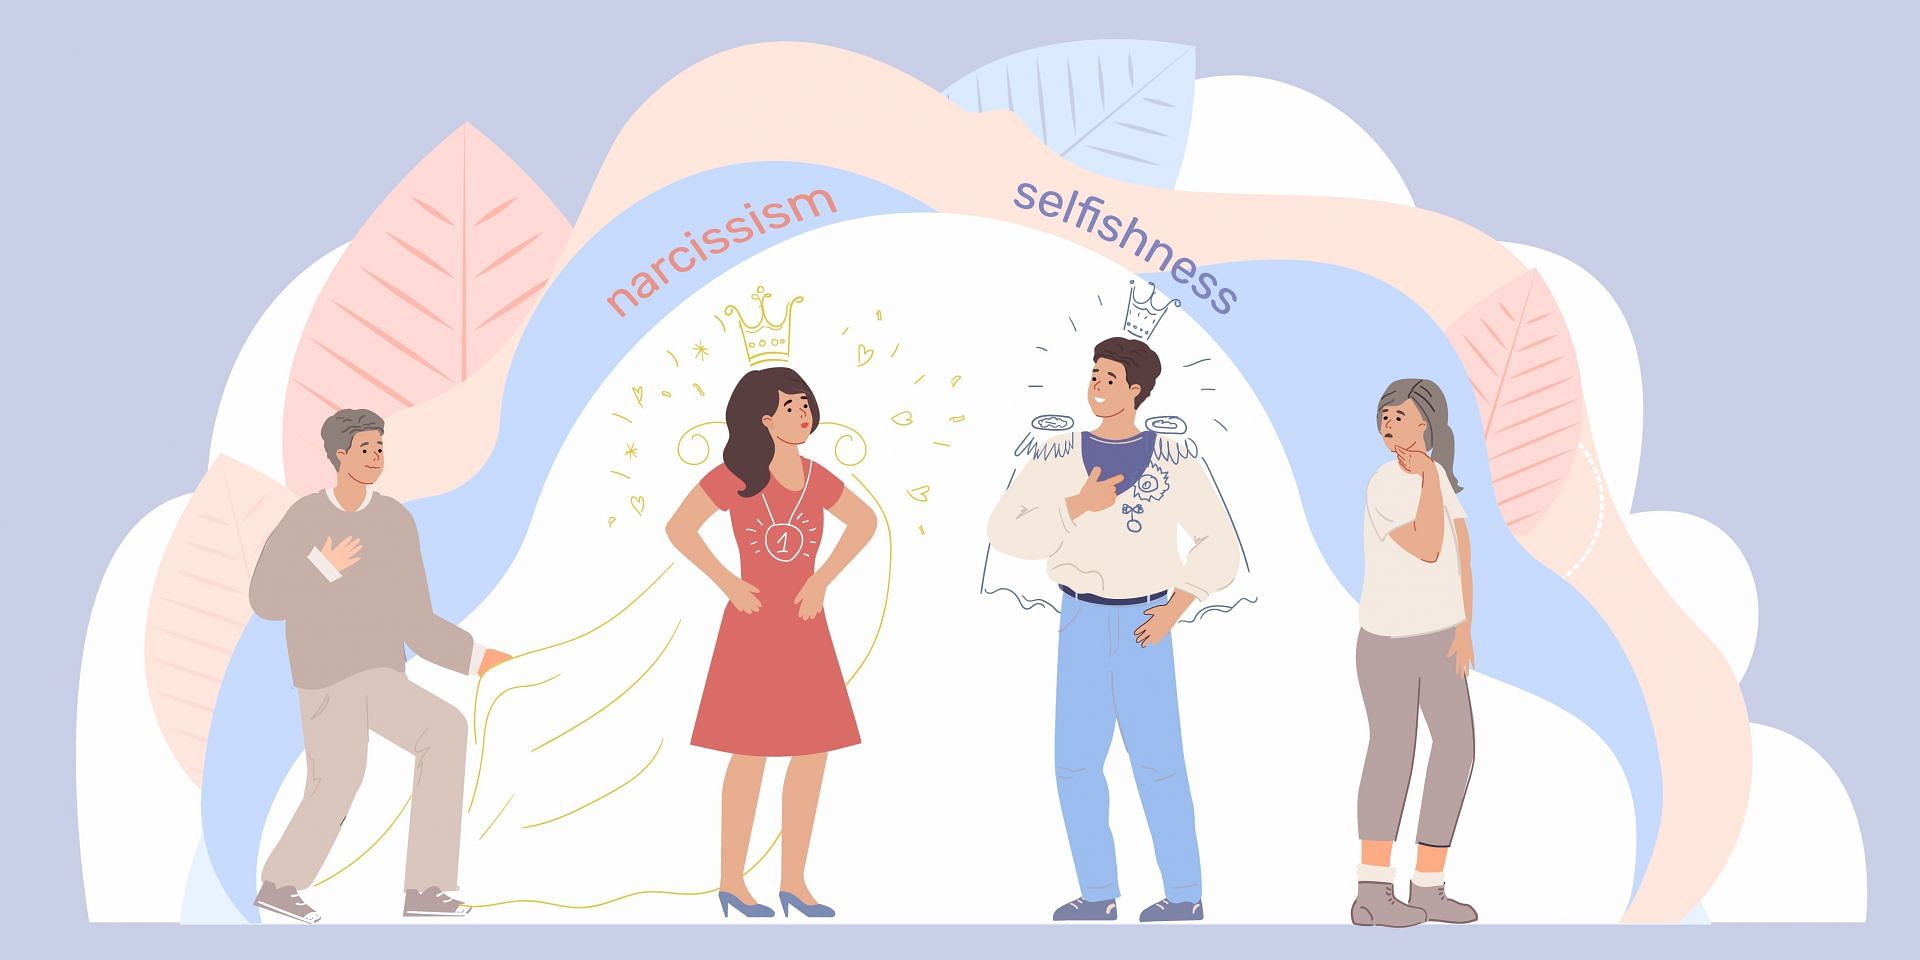 The types of narcissism is not the same as selfishness. (Image via freepik/ Macrovector)